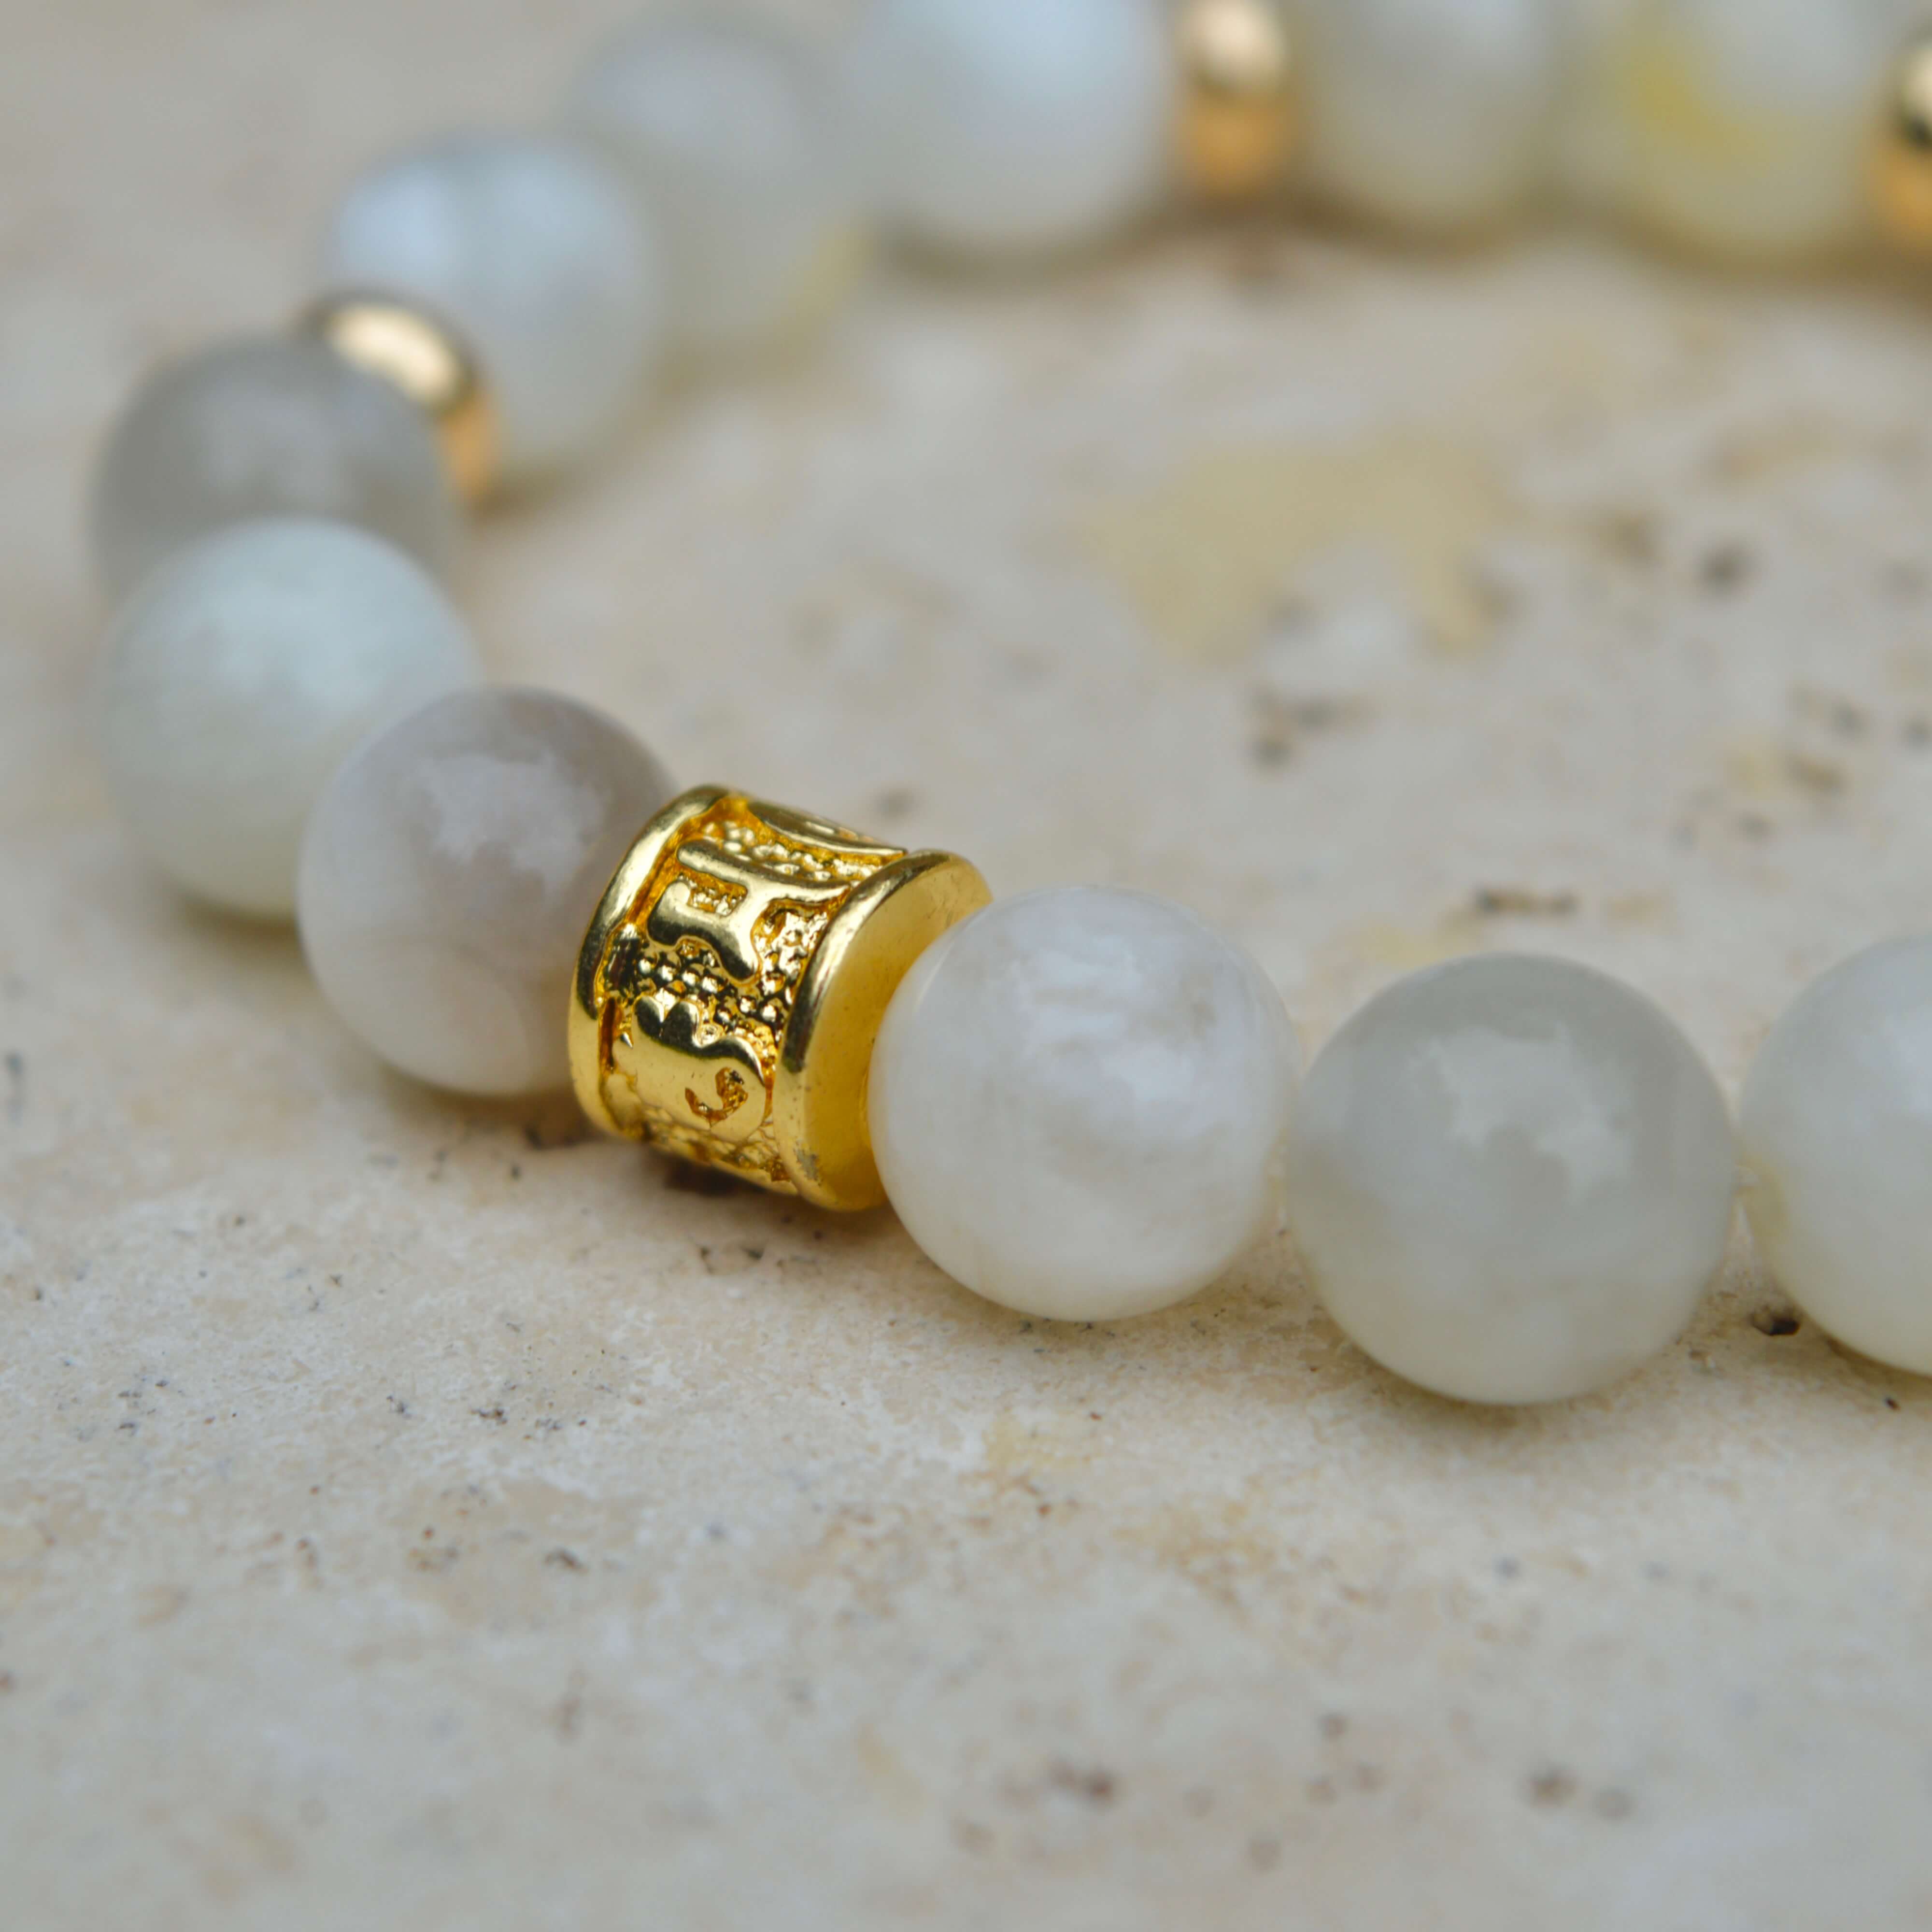 WHITE MOONSTONE & GOLD BEADED BRACELET - HALCYON COLLECTION - Headless Nation